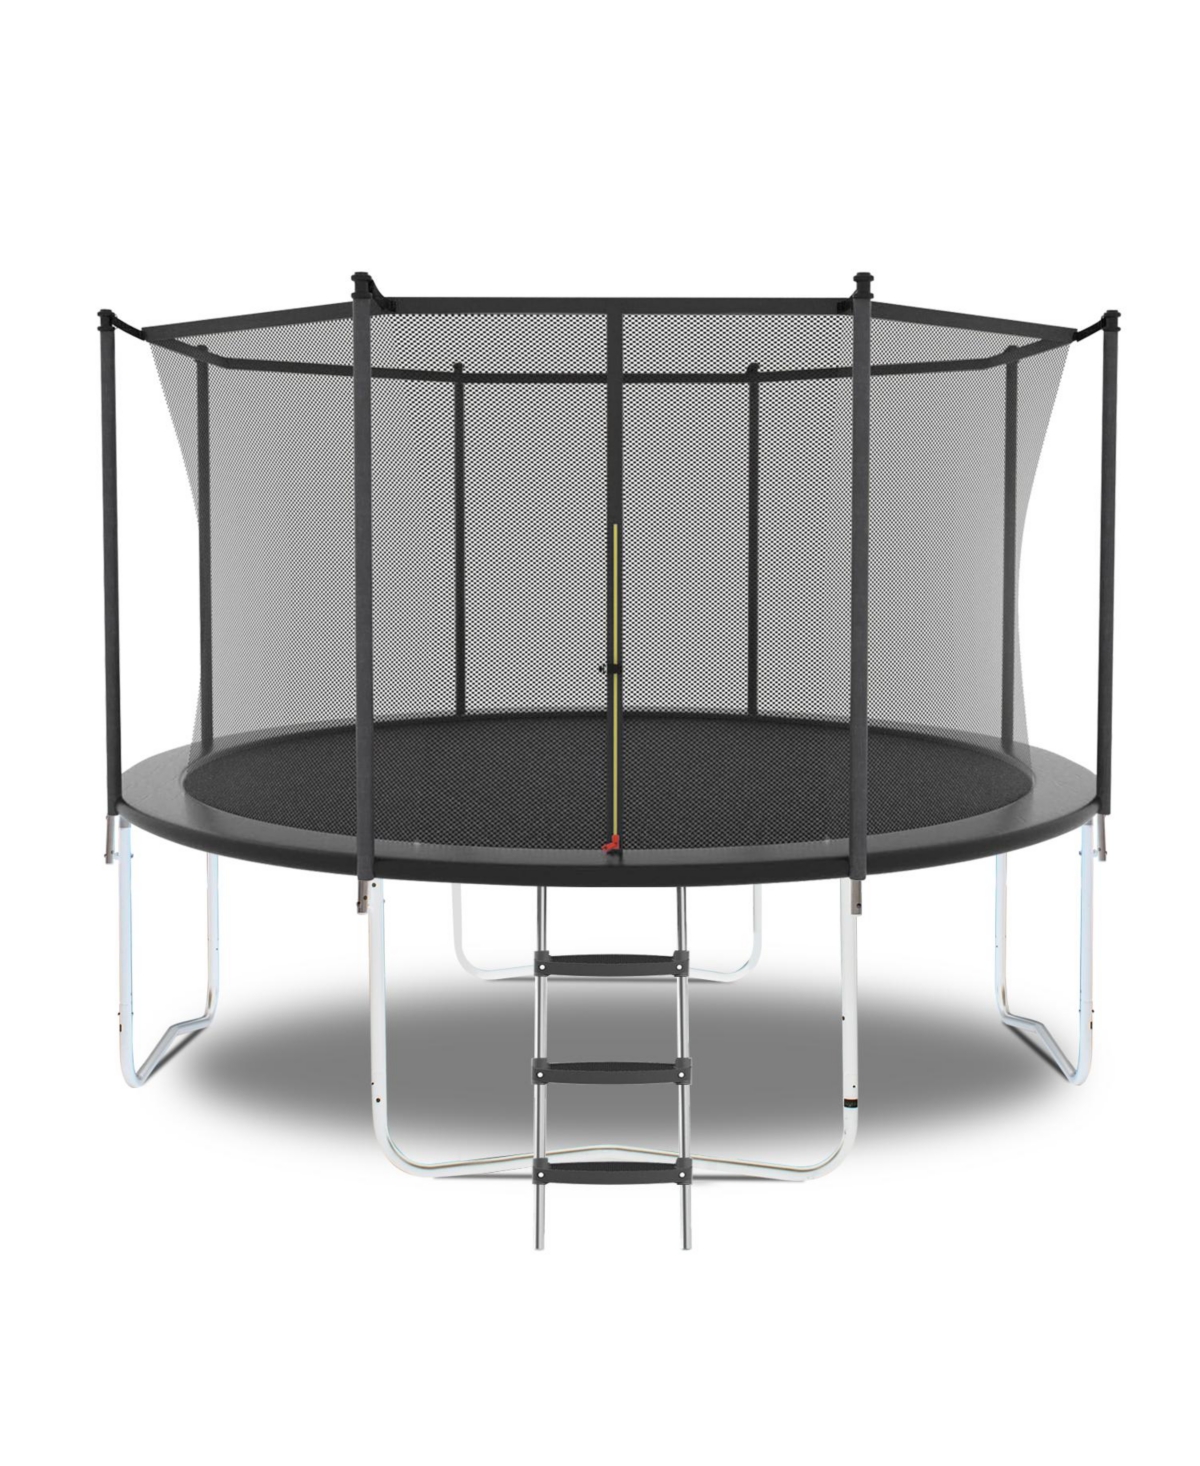 Family Trampoline 14FT Outer Perimeter Safety Protection High Bearing Strength Material Solid - Grey